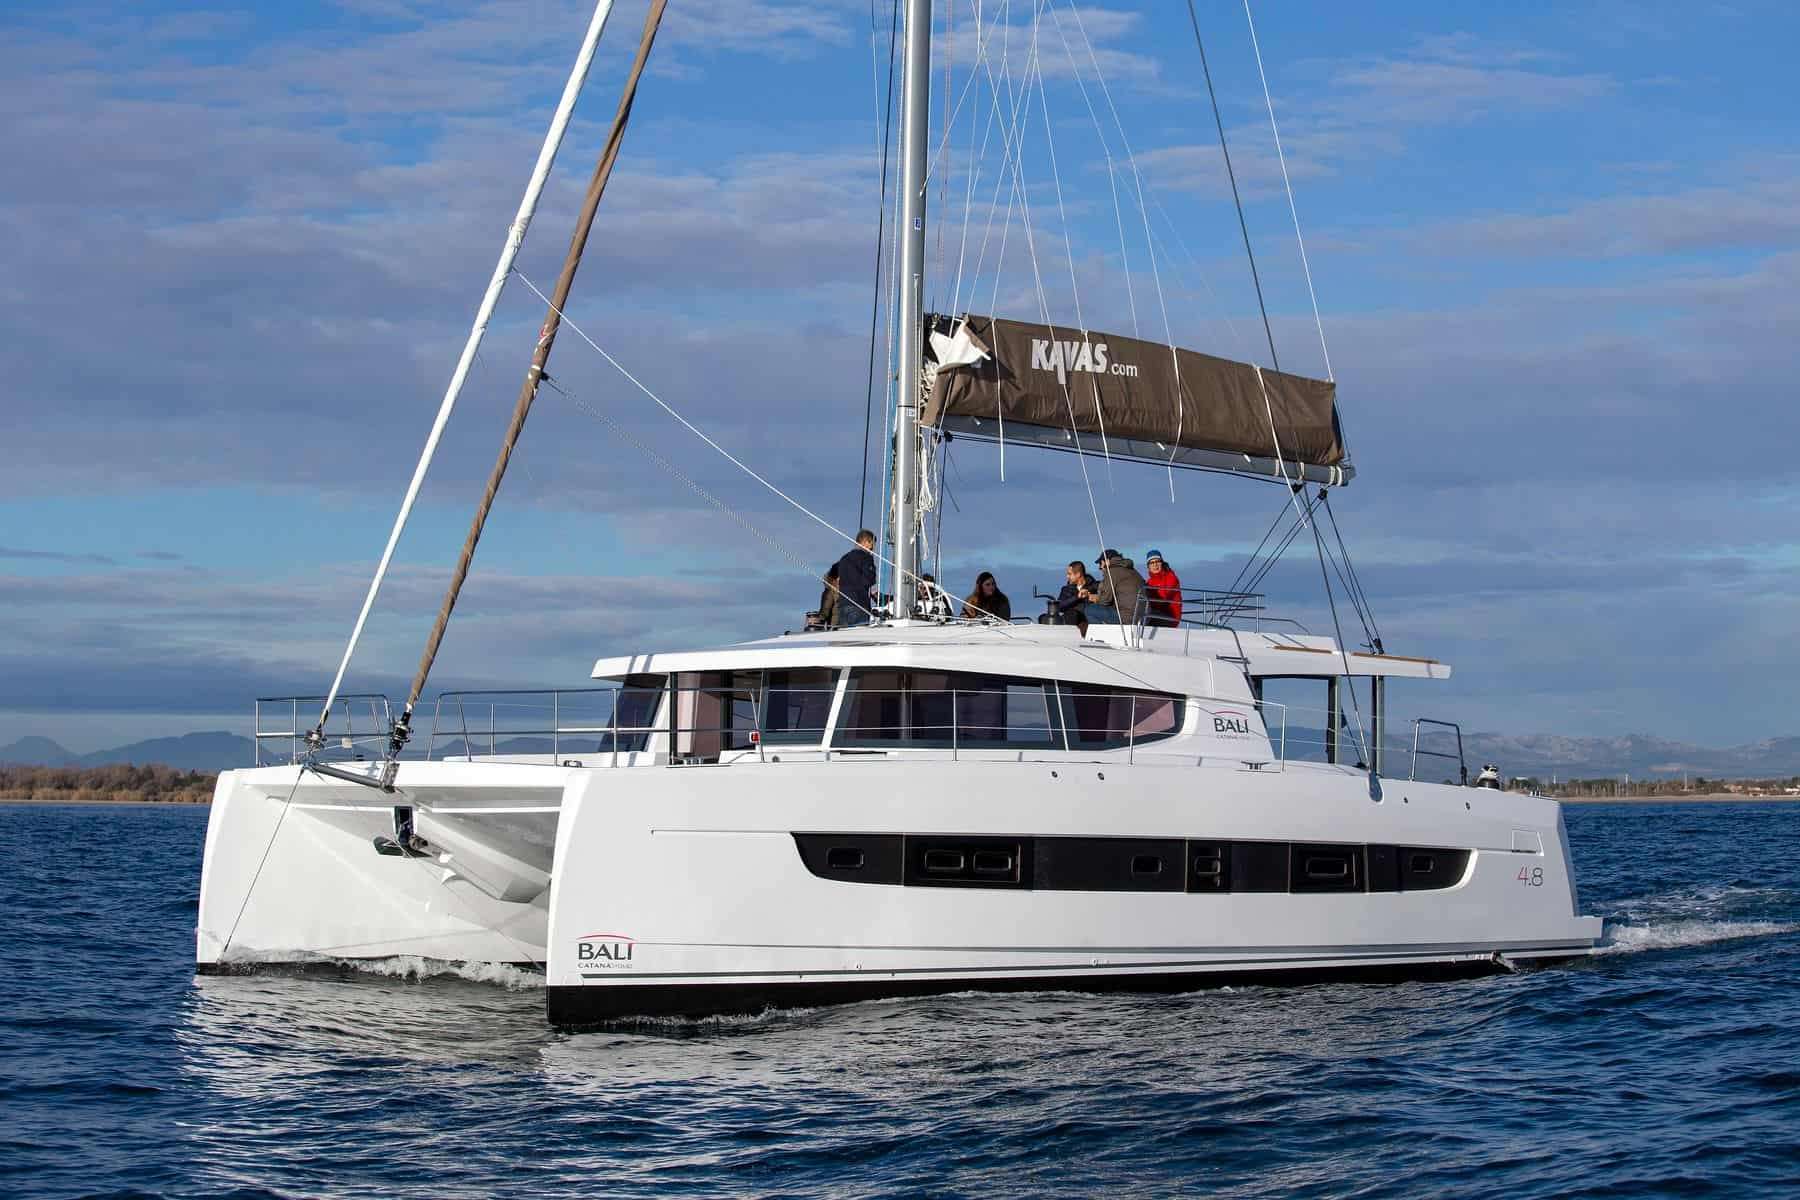 The BALI 4.8 Open Space brings together the best of the original characteristics that make up the DNA of BALI catamarans.

In addition to the recognized innovations such as the rigid forward cockpit with lounge area and sunbathing area; the new platform linking the two sugarscoops with large bench seat and lockers; the large tilt and-turn door and sliding windows; and a panoramic relaxation area on the coachroof, the BALI 4.8 offers, as does the 5.4, new access to the forward cockpit by an interior door and cabins by panels opening onto the aft cockpit.